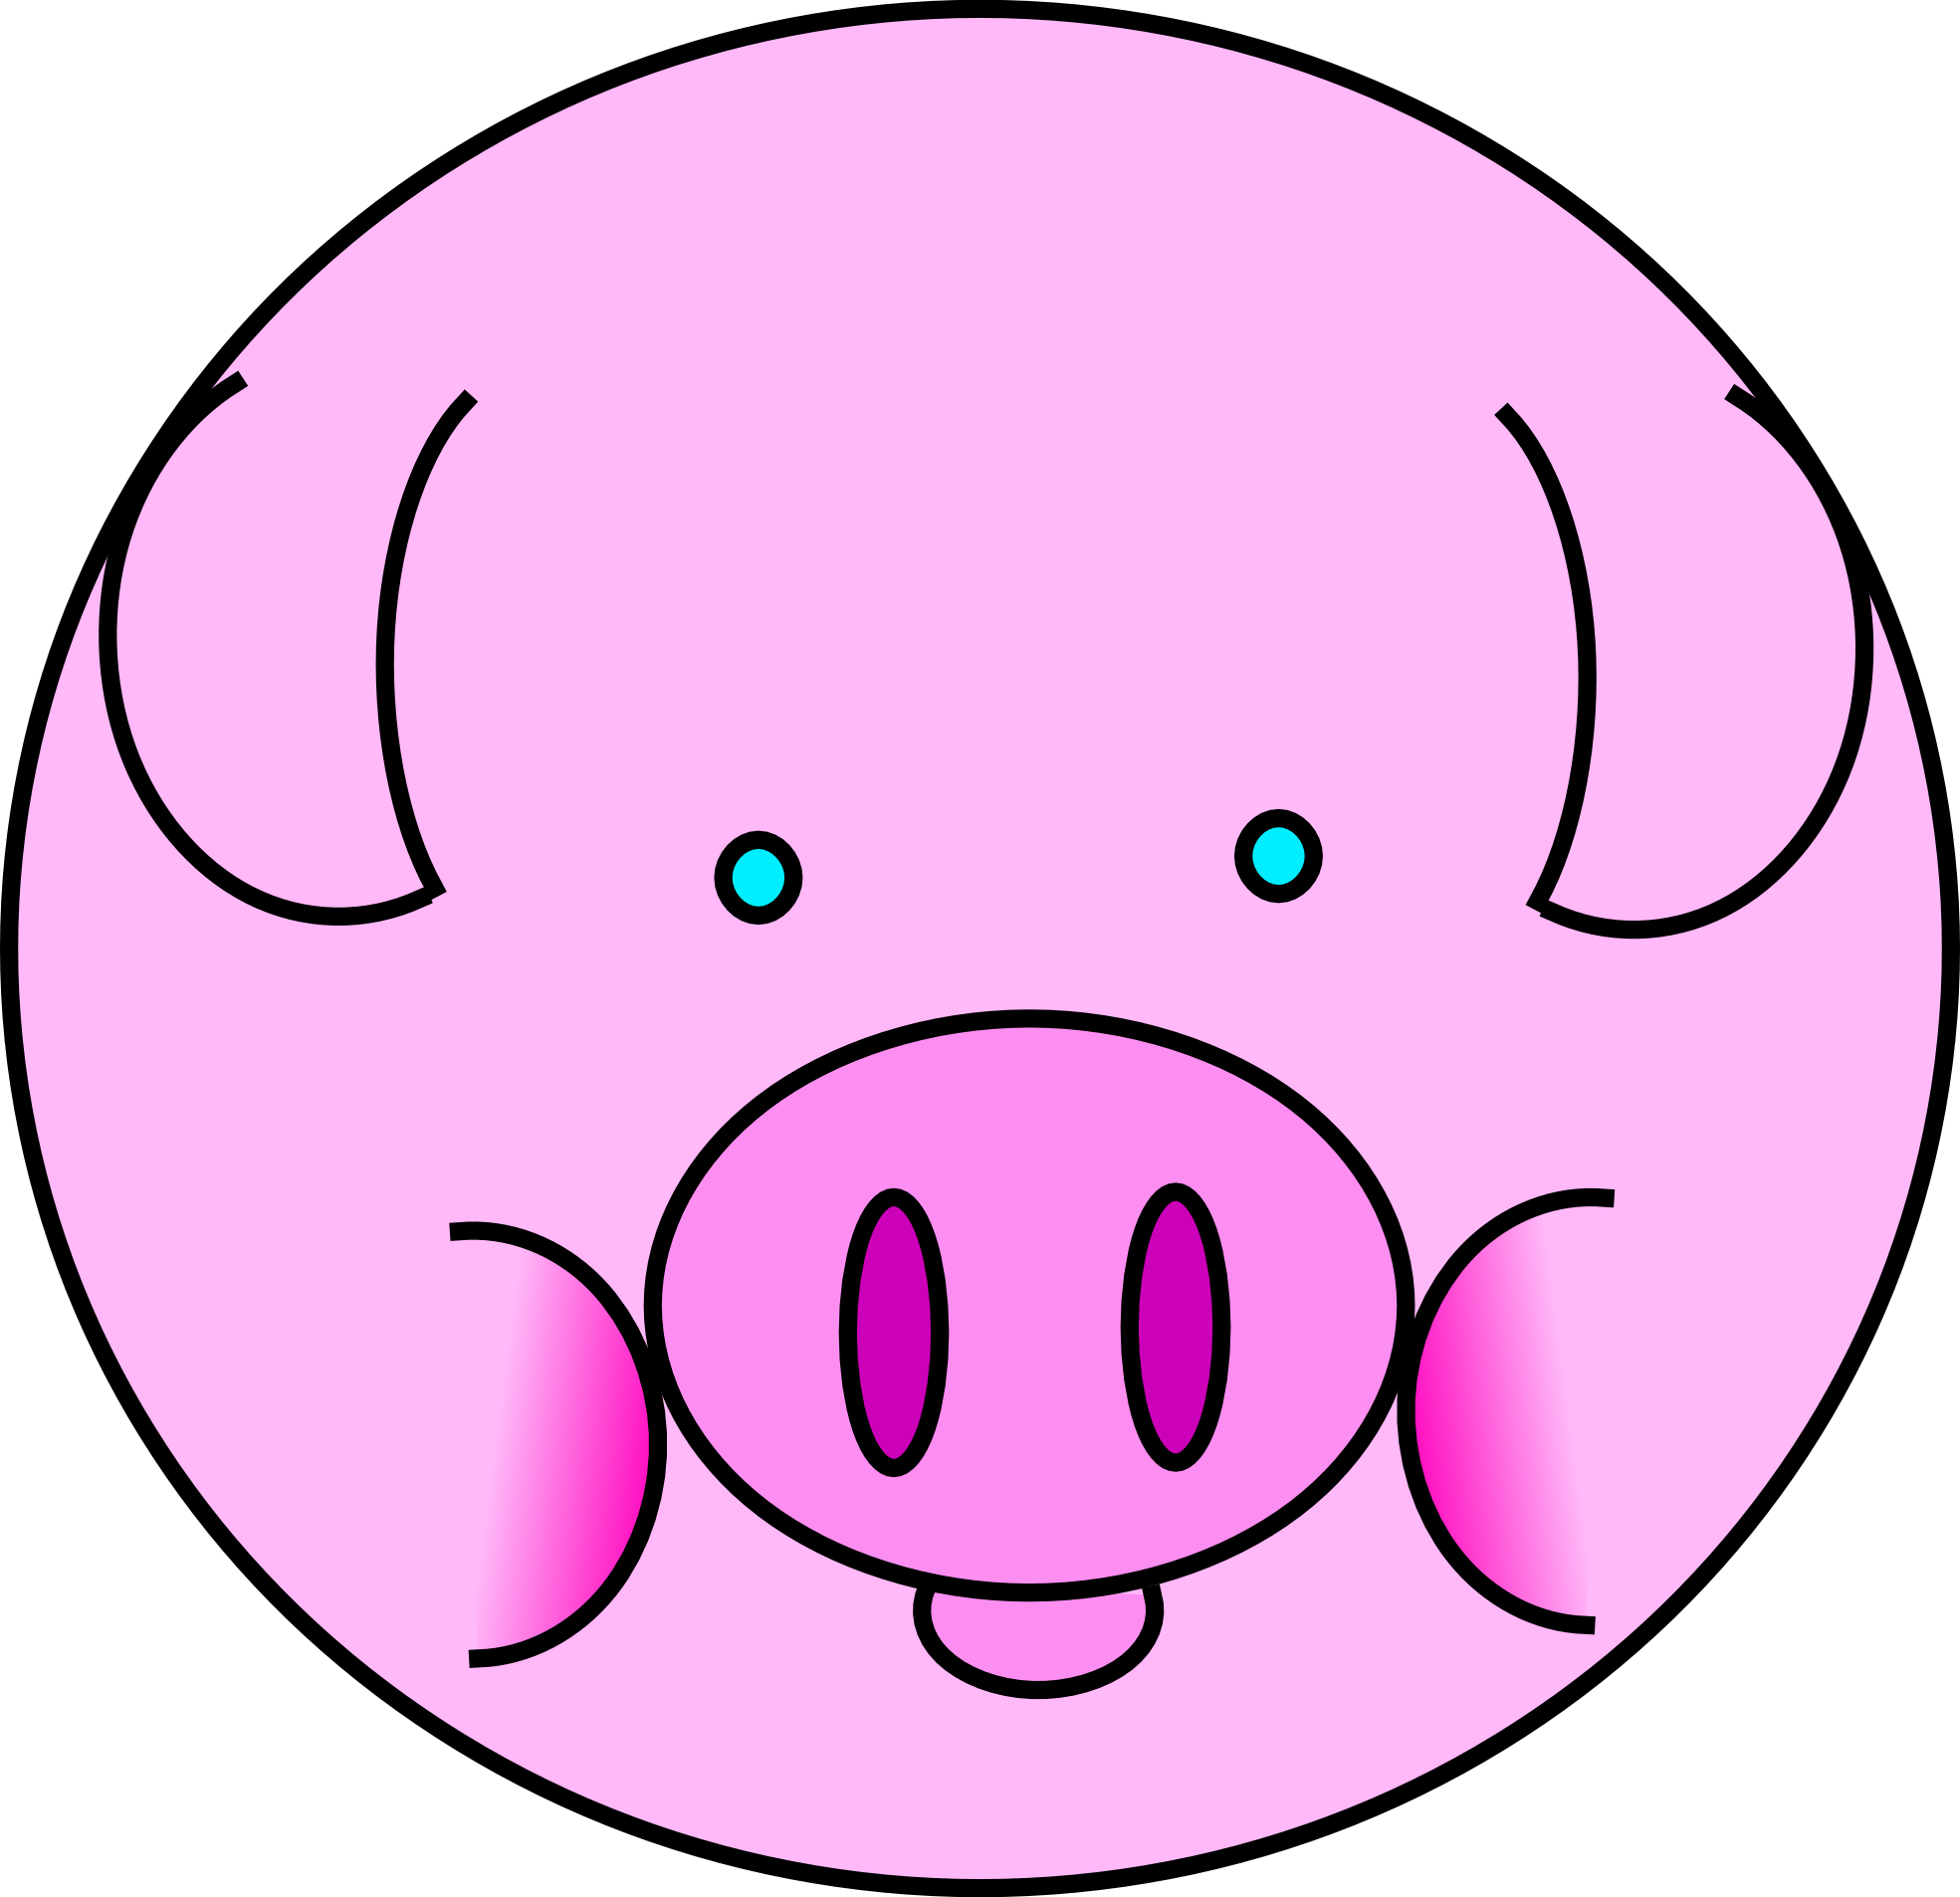 Pig clipart free clipart images 3 clipartcow